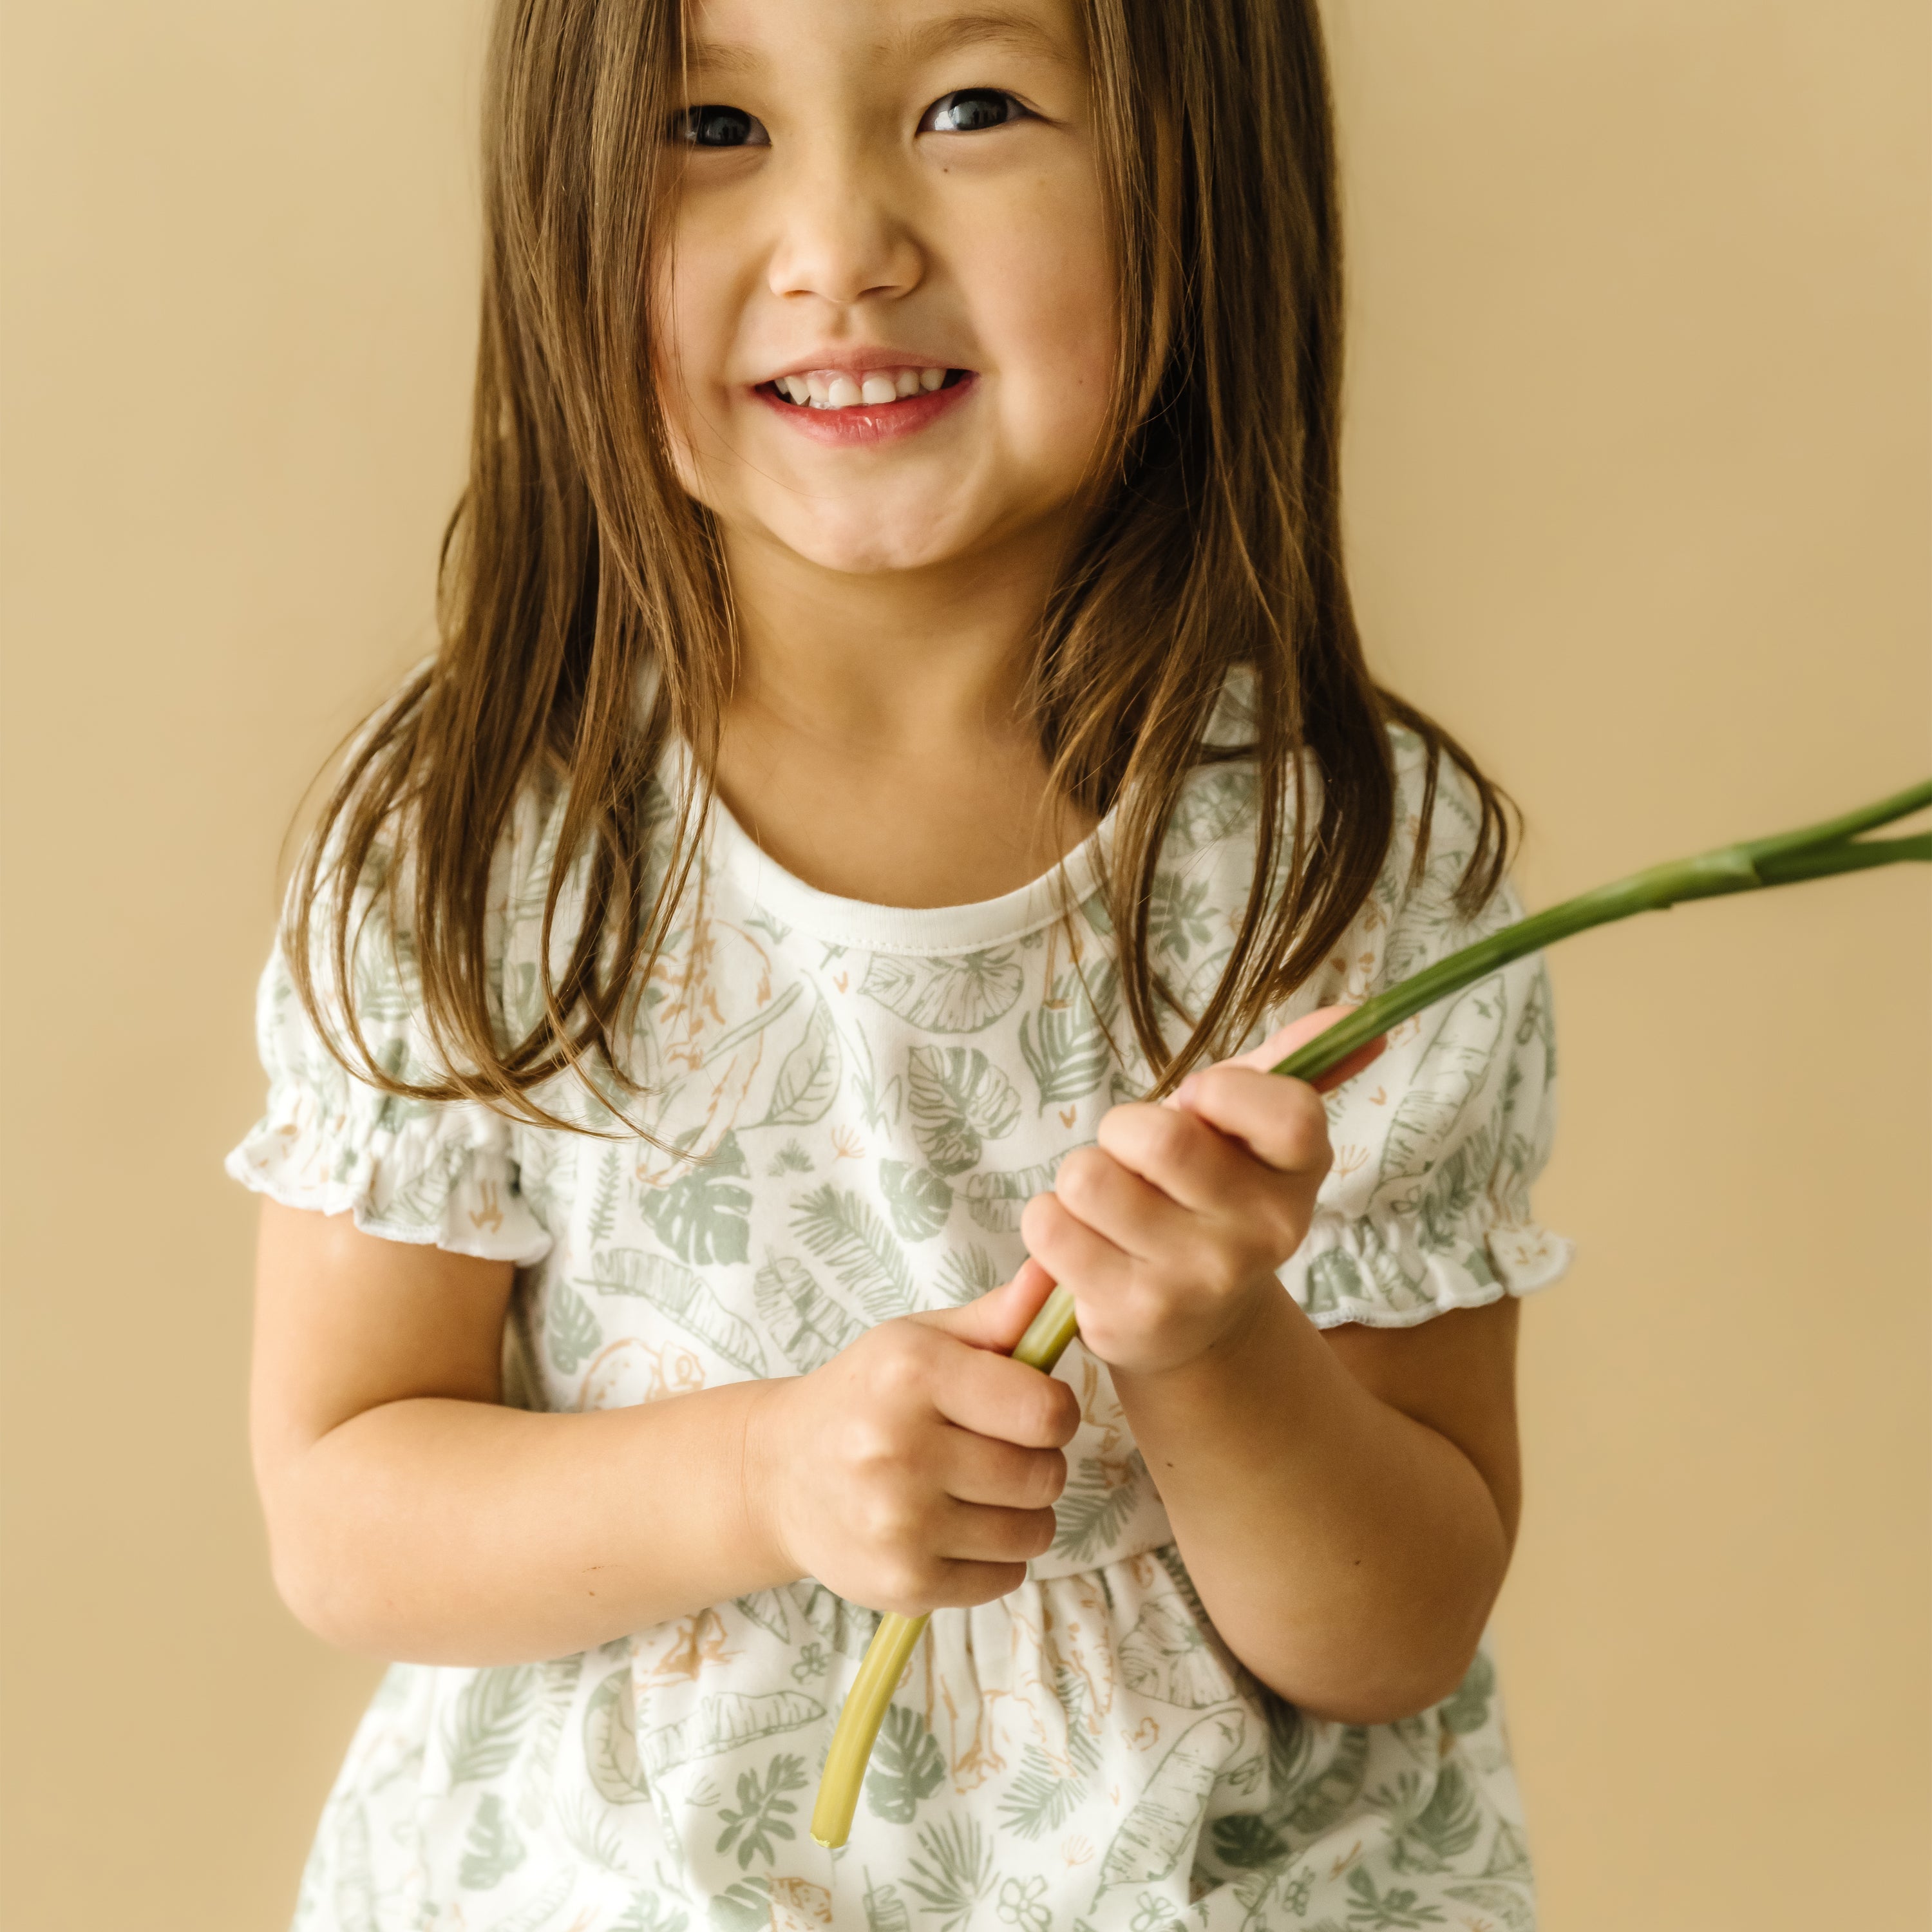 A young girl with long hair, smiling, holding a green flower stem from Makemake Organics, wearing a Organic Puff Sleeve Dress - Wild Safari by Organic Kids, against a light beige background.